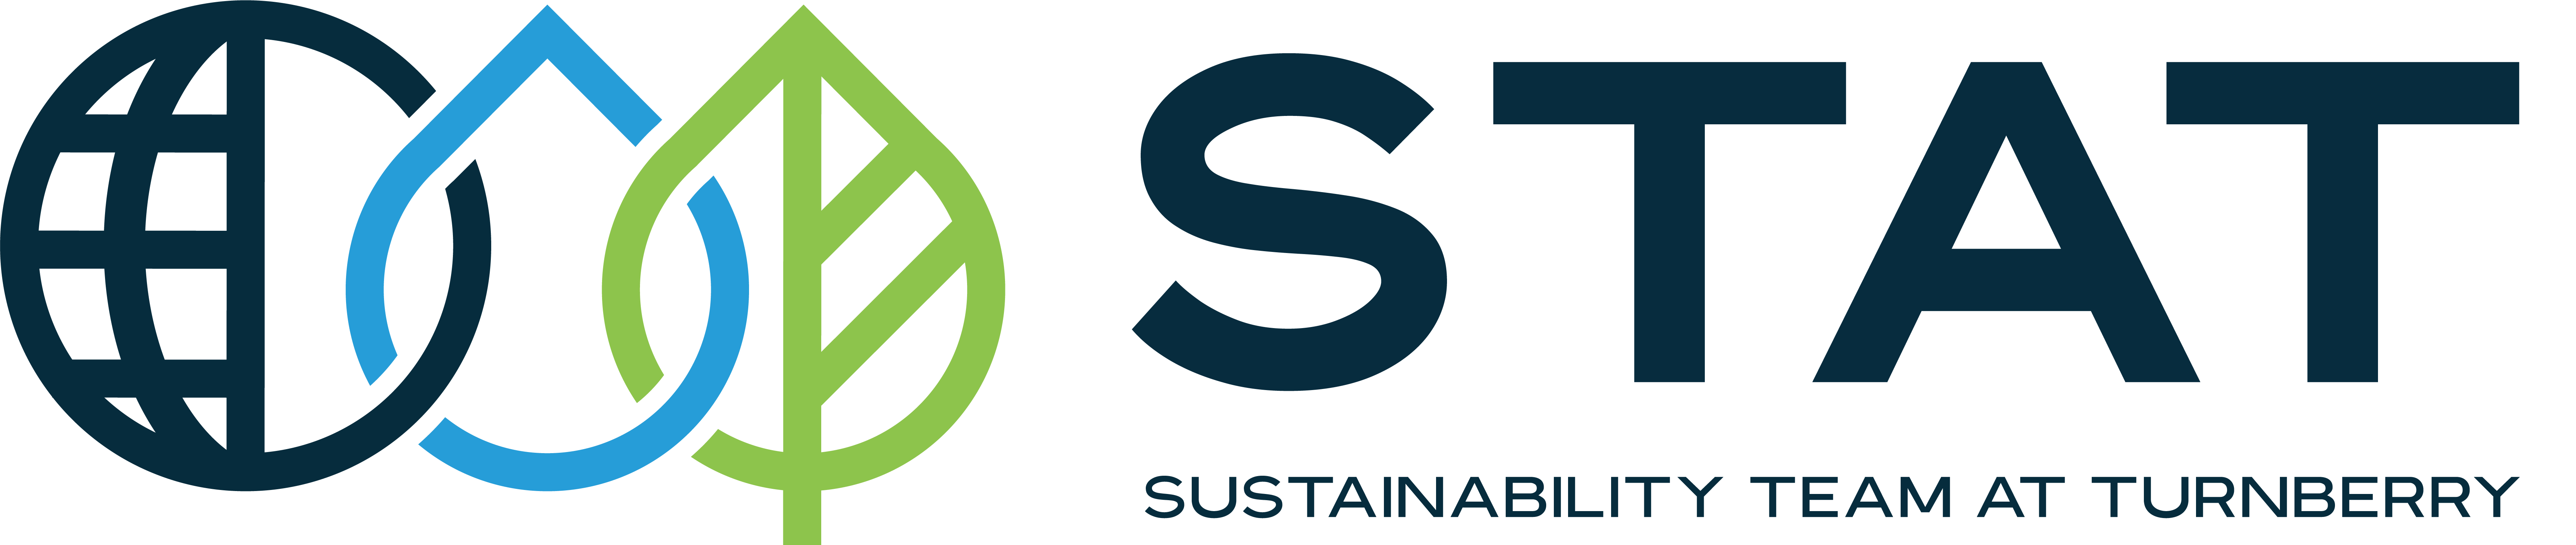 Sustainability at Turnberry